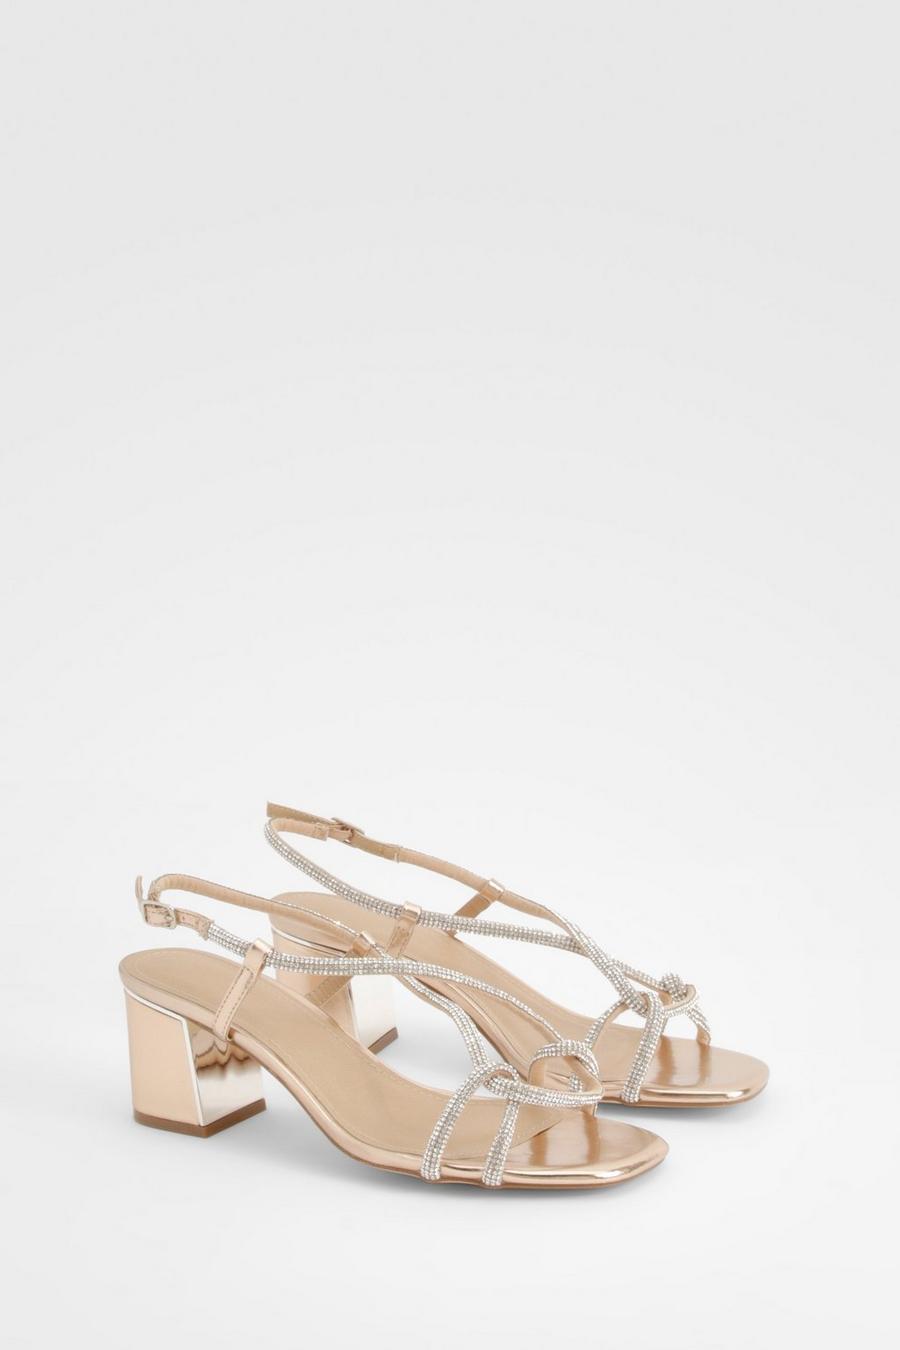 Rose gold Wide Fit Diamante Strappy Low Block Heel